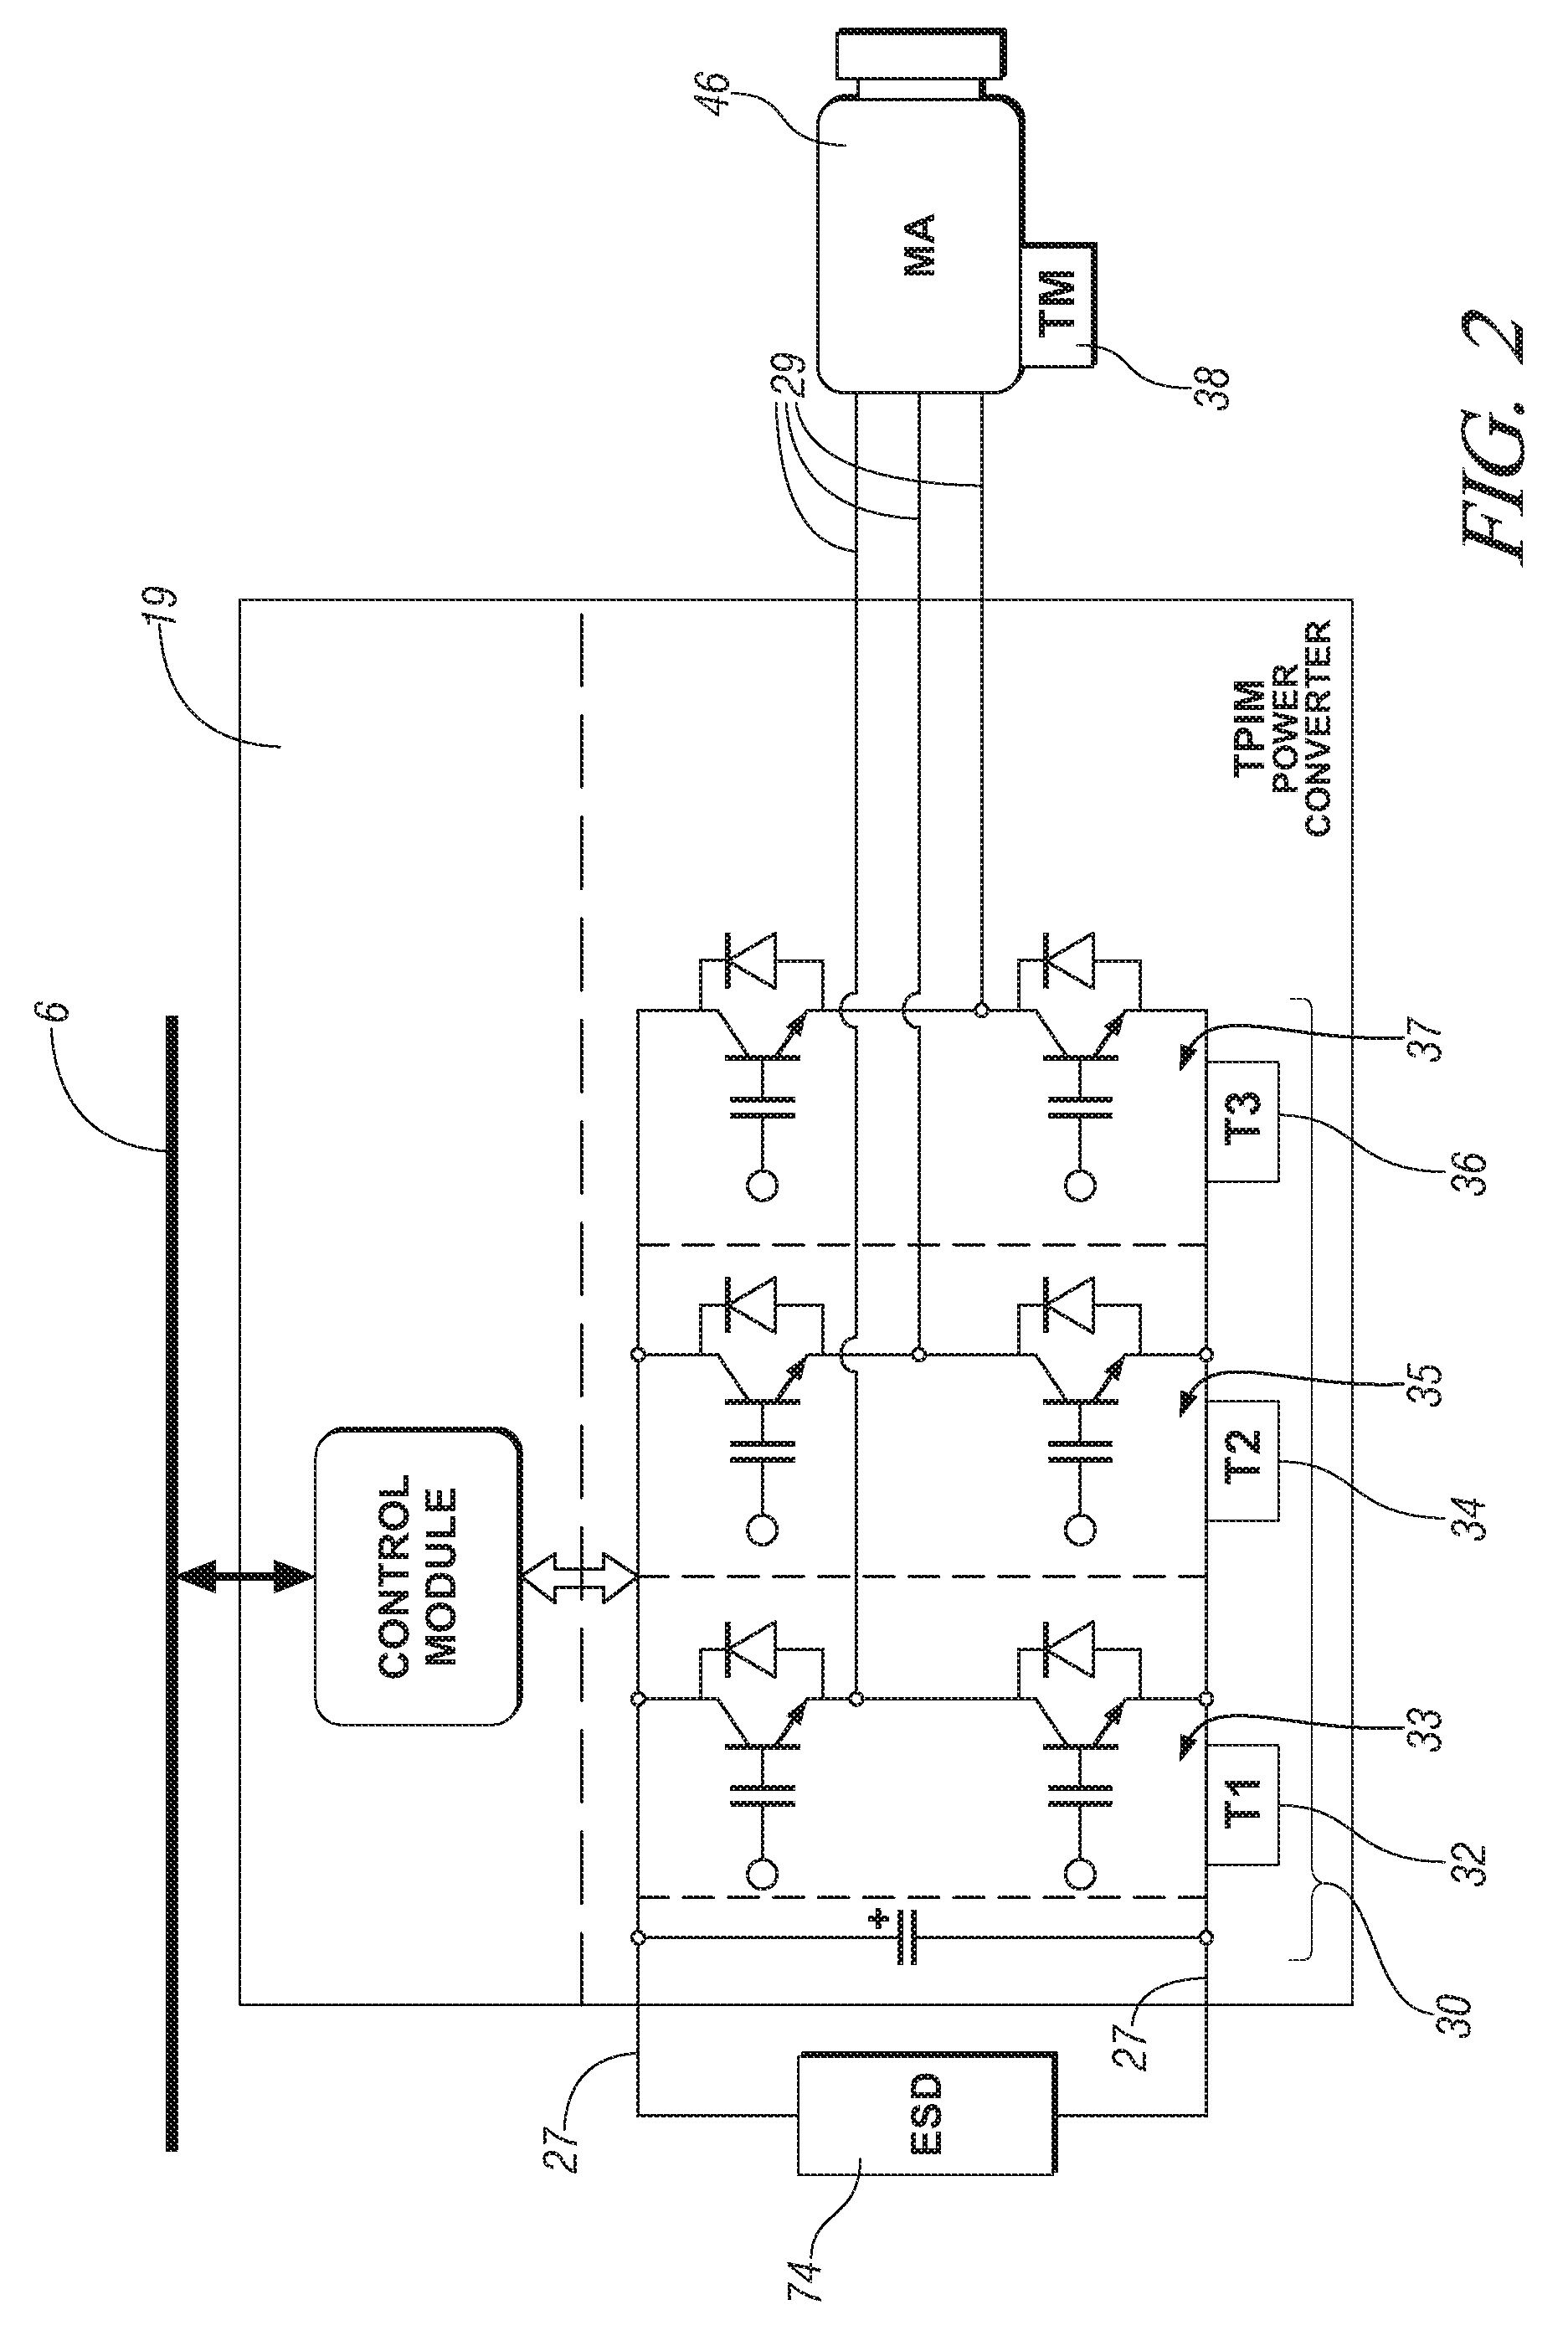 Method and apparatus to monitor a temperature sensing device